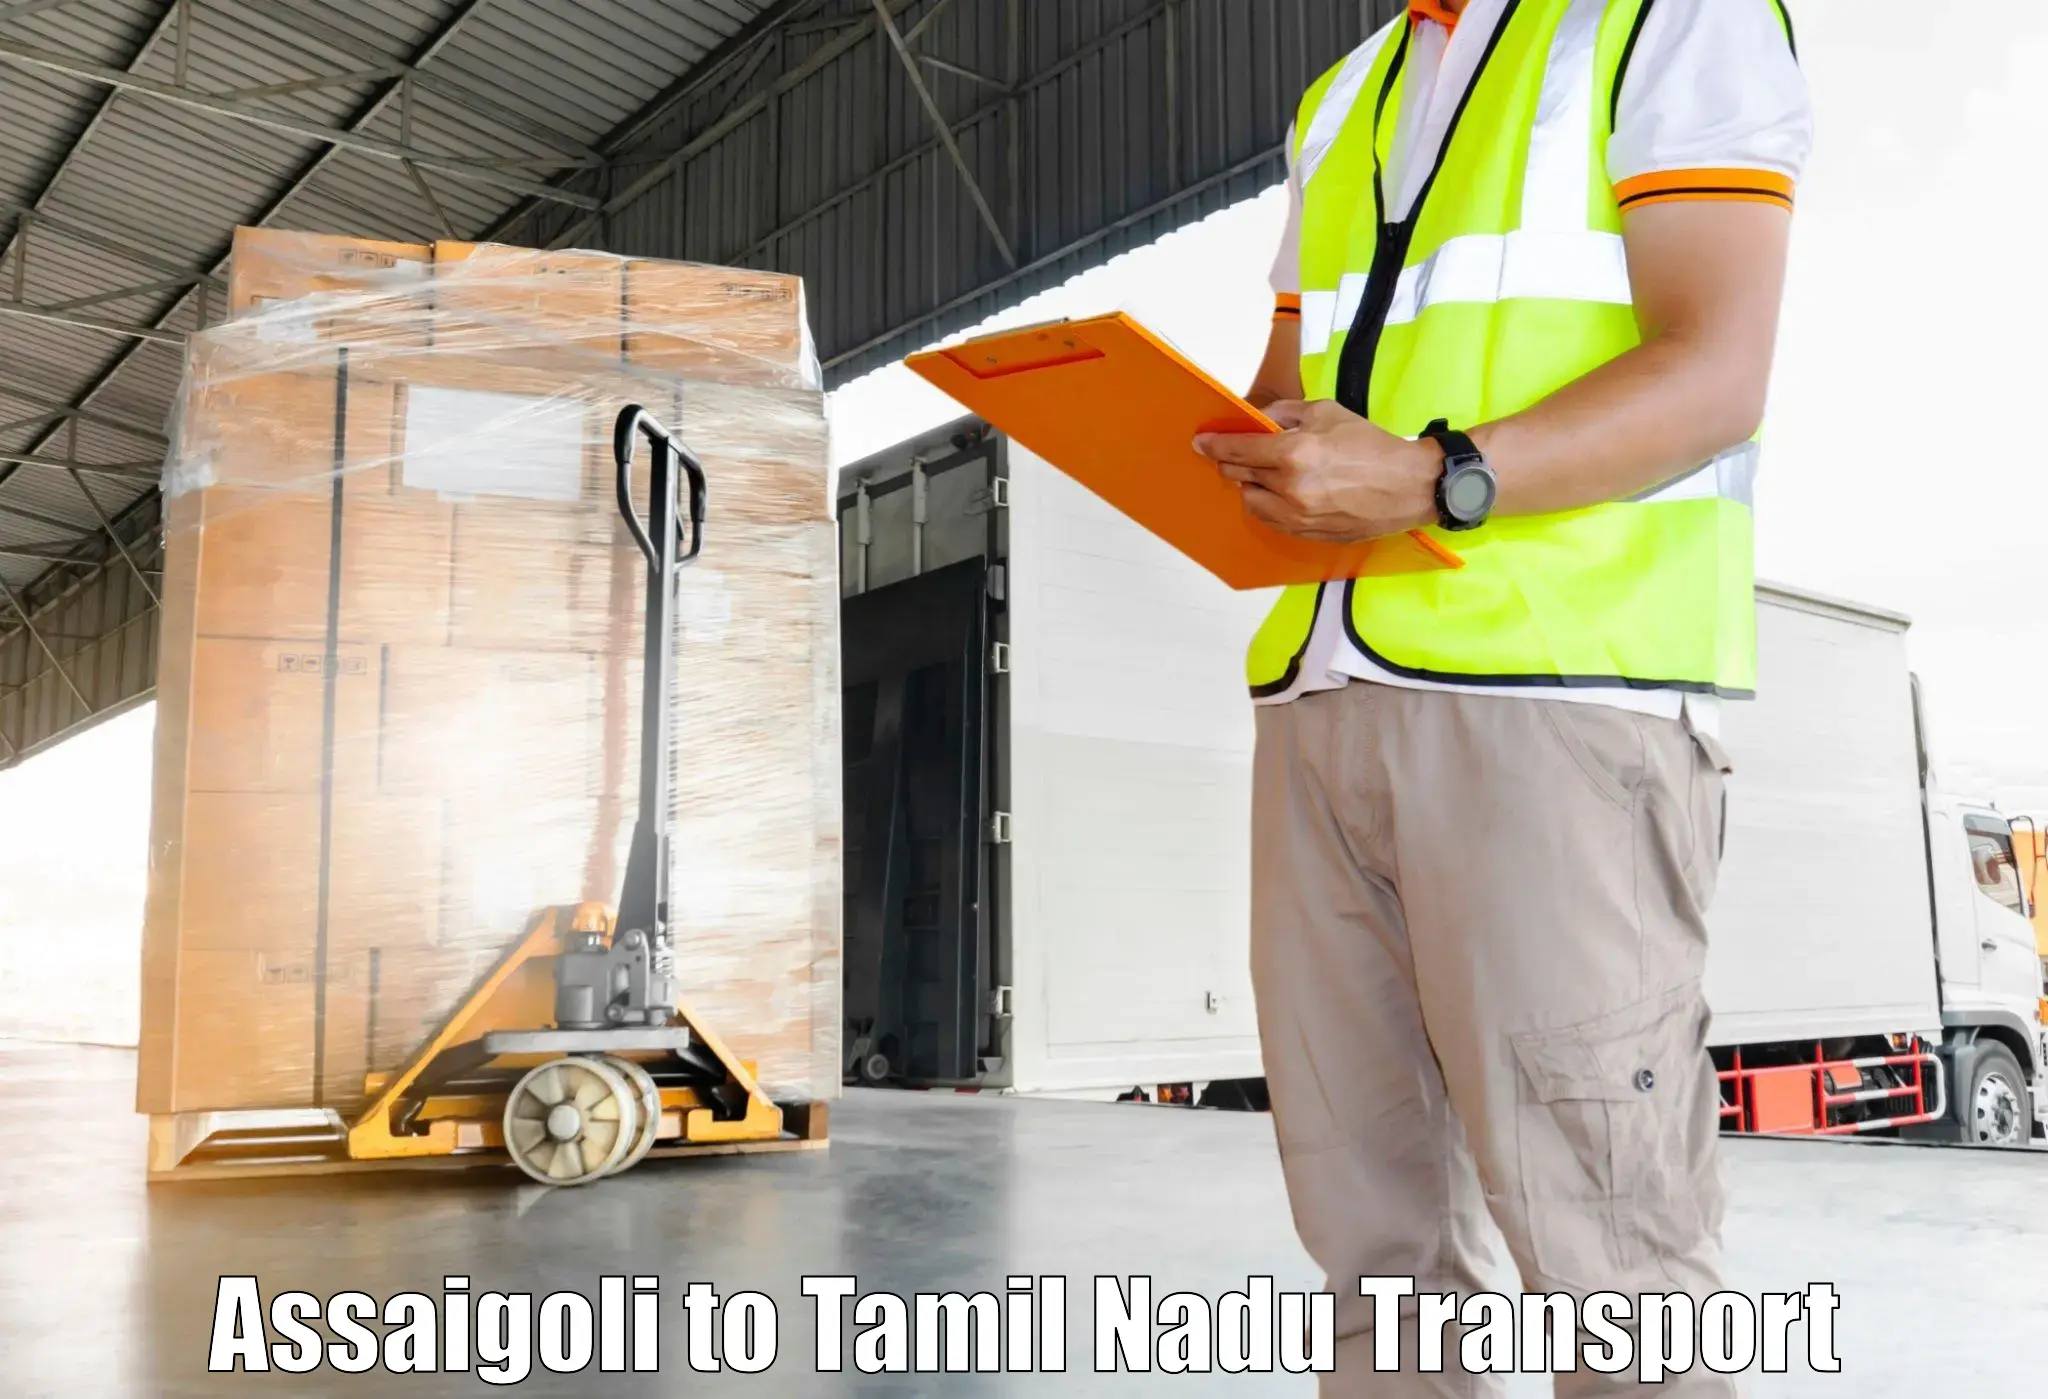 Transport bike from one state to another in Assaigoli to Velur